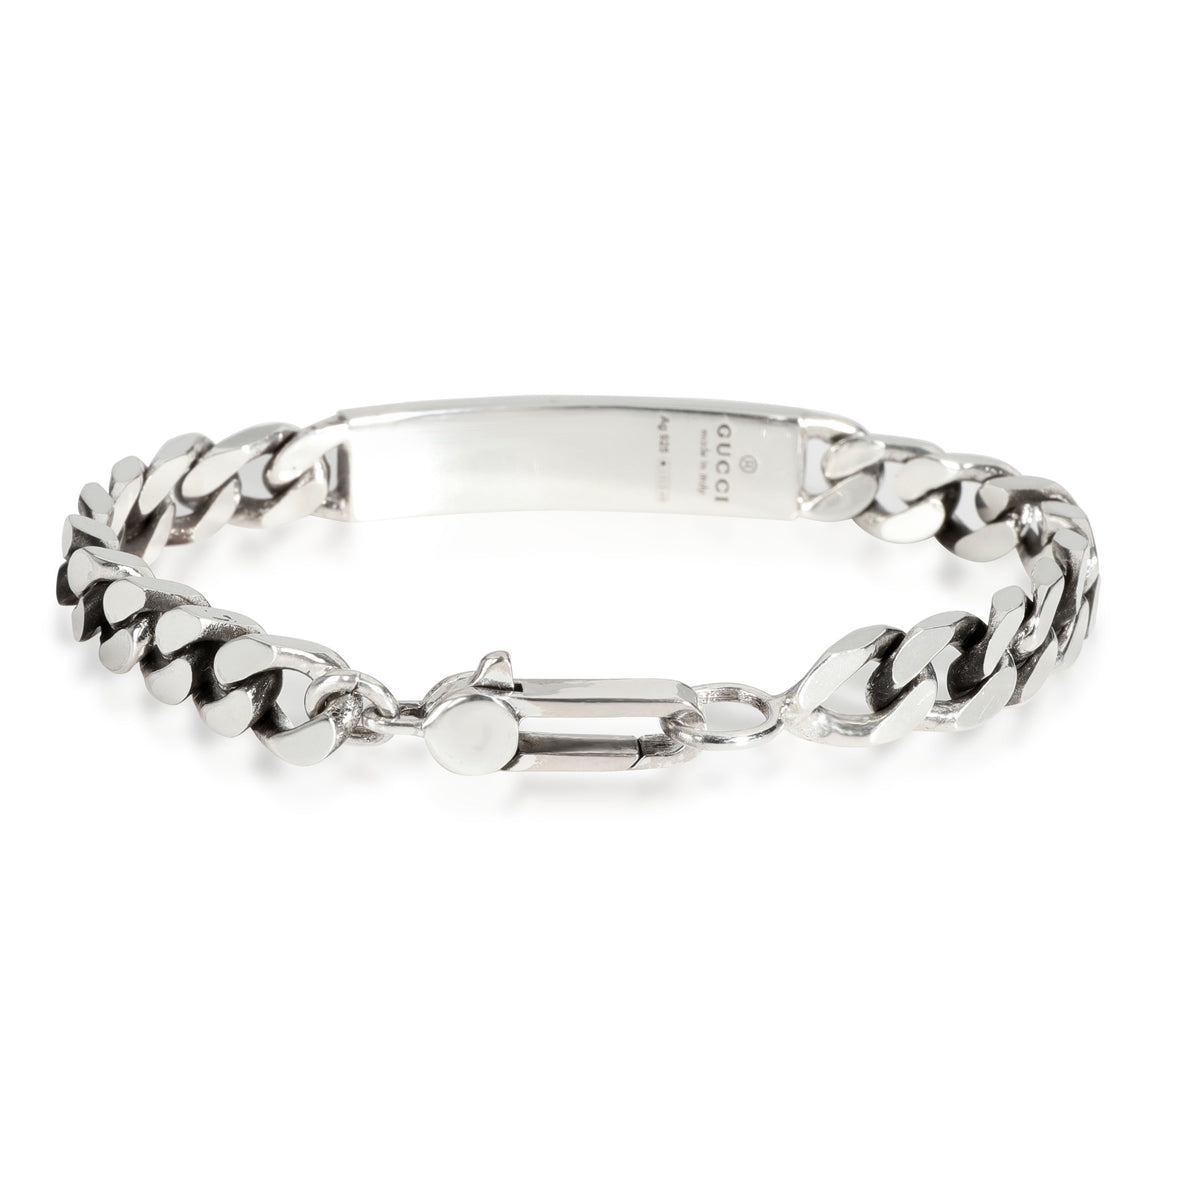 Gucci Ghost Chain ID Bracelet in Sterling Silver